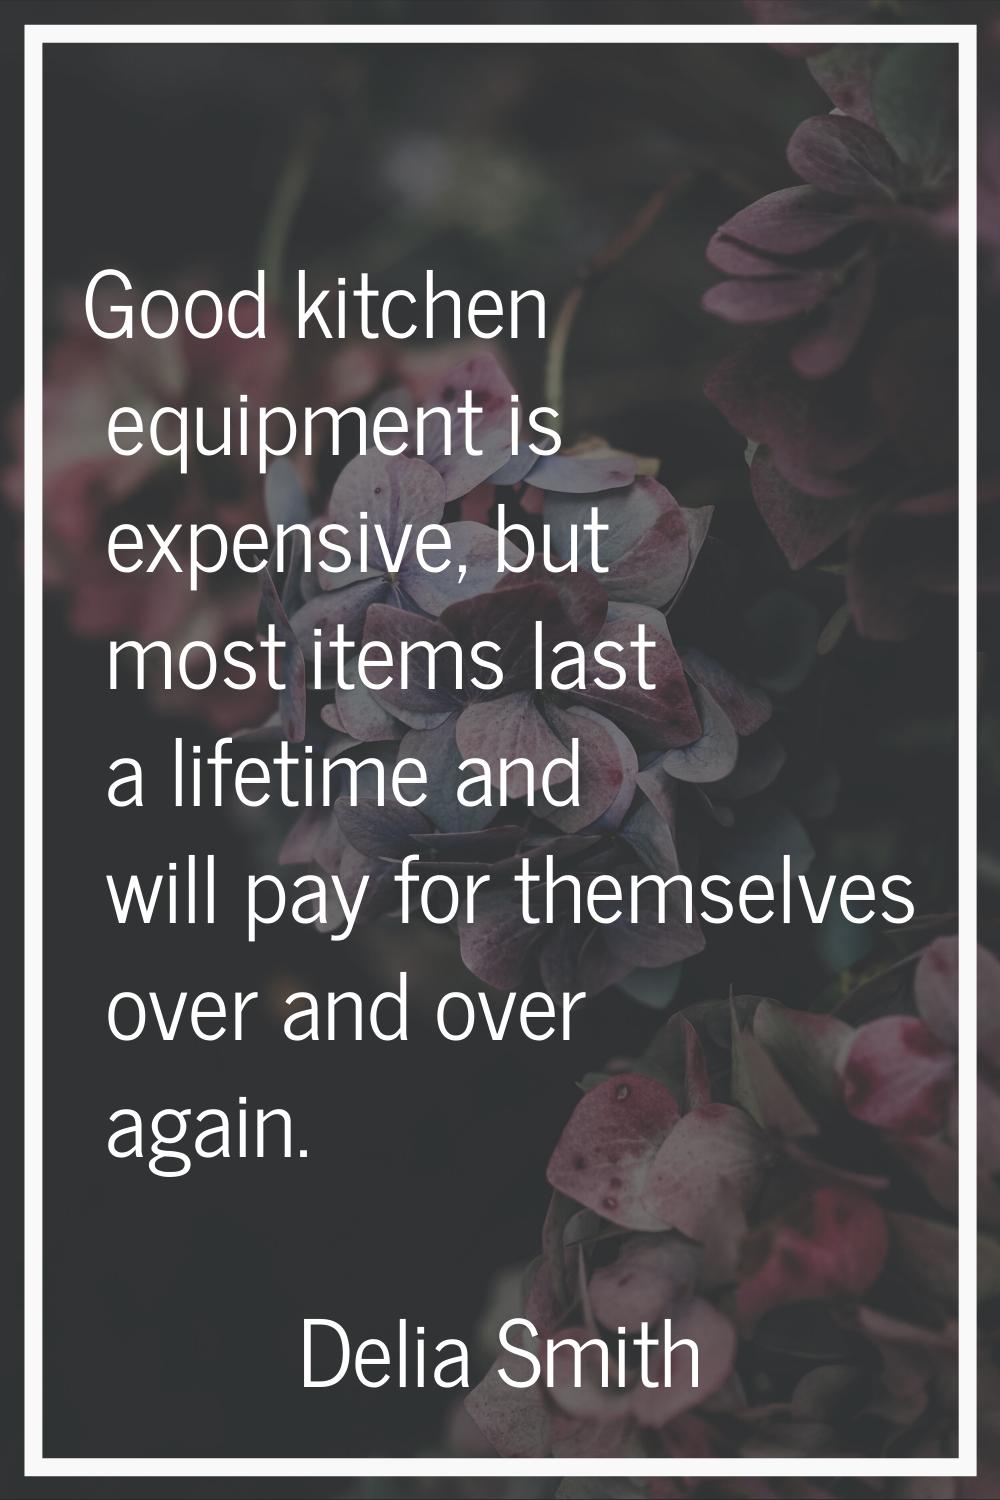 Good kitchen equipment is expensive, but most items last a lifetime and will pay for themselves ove